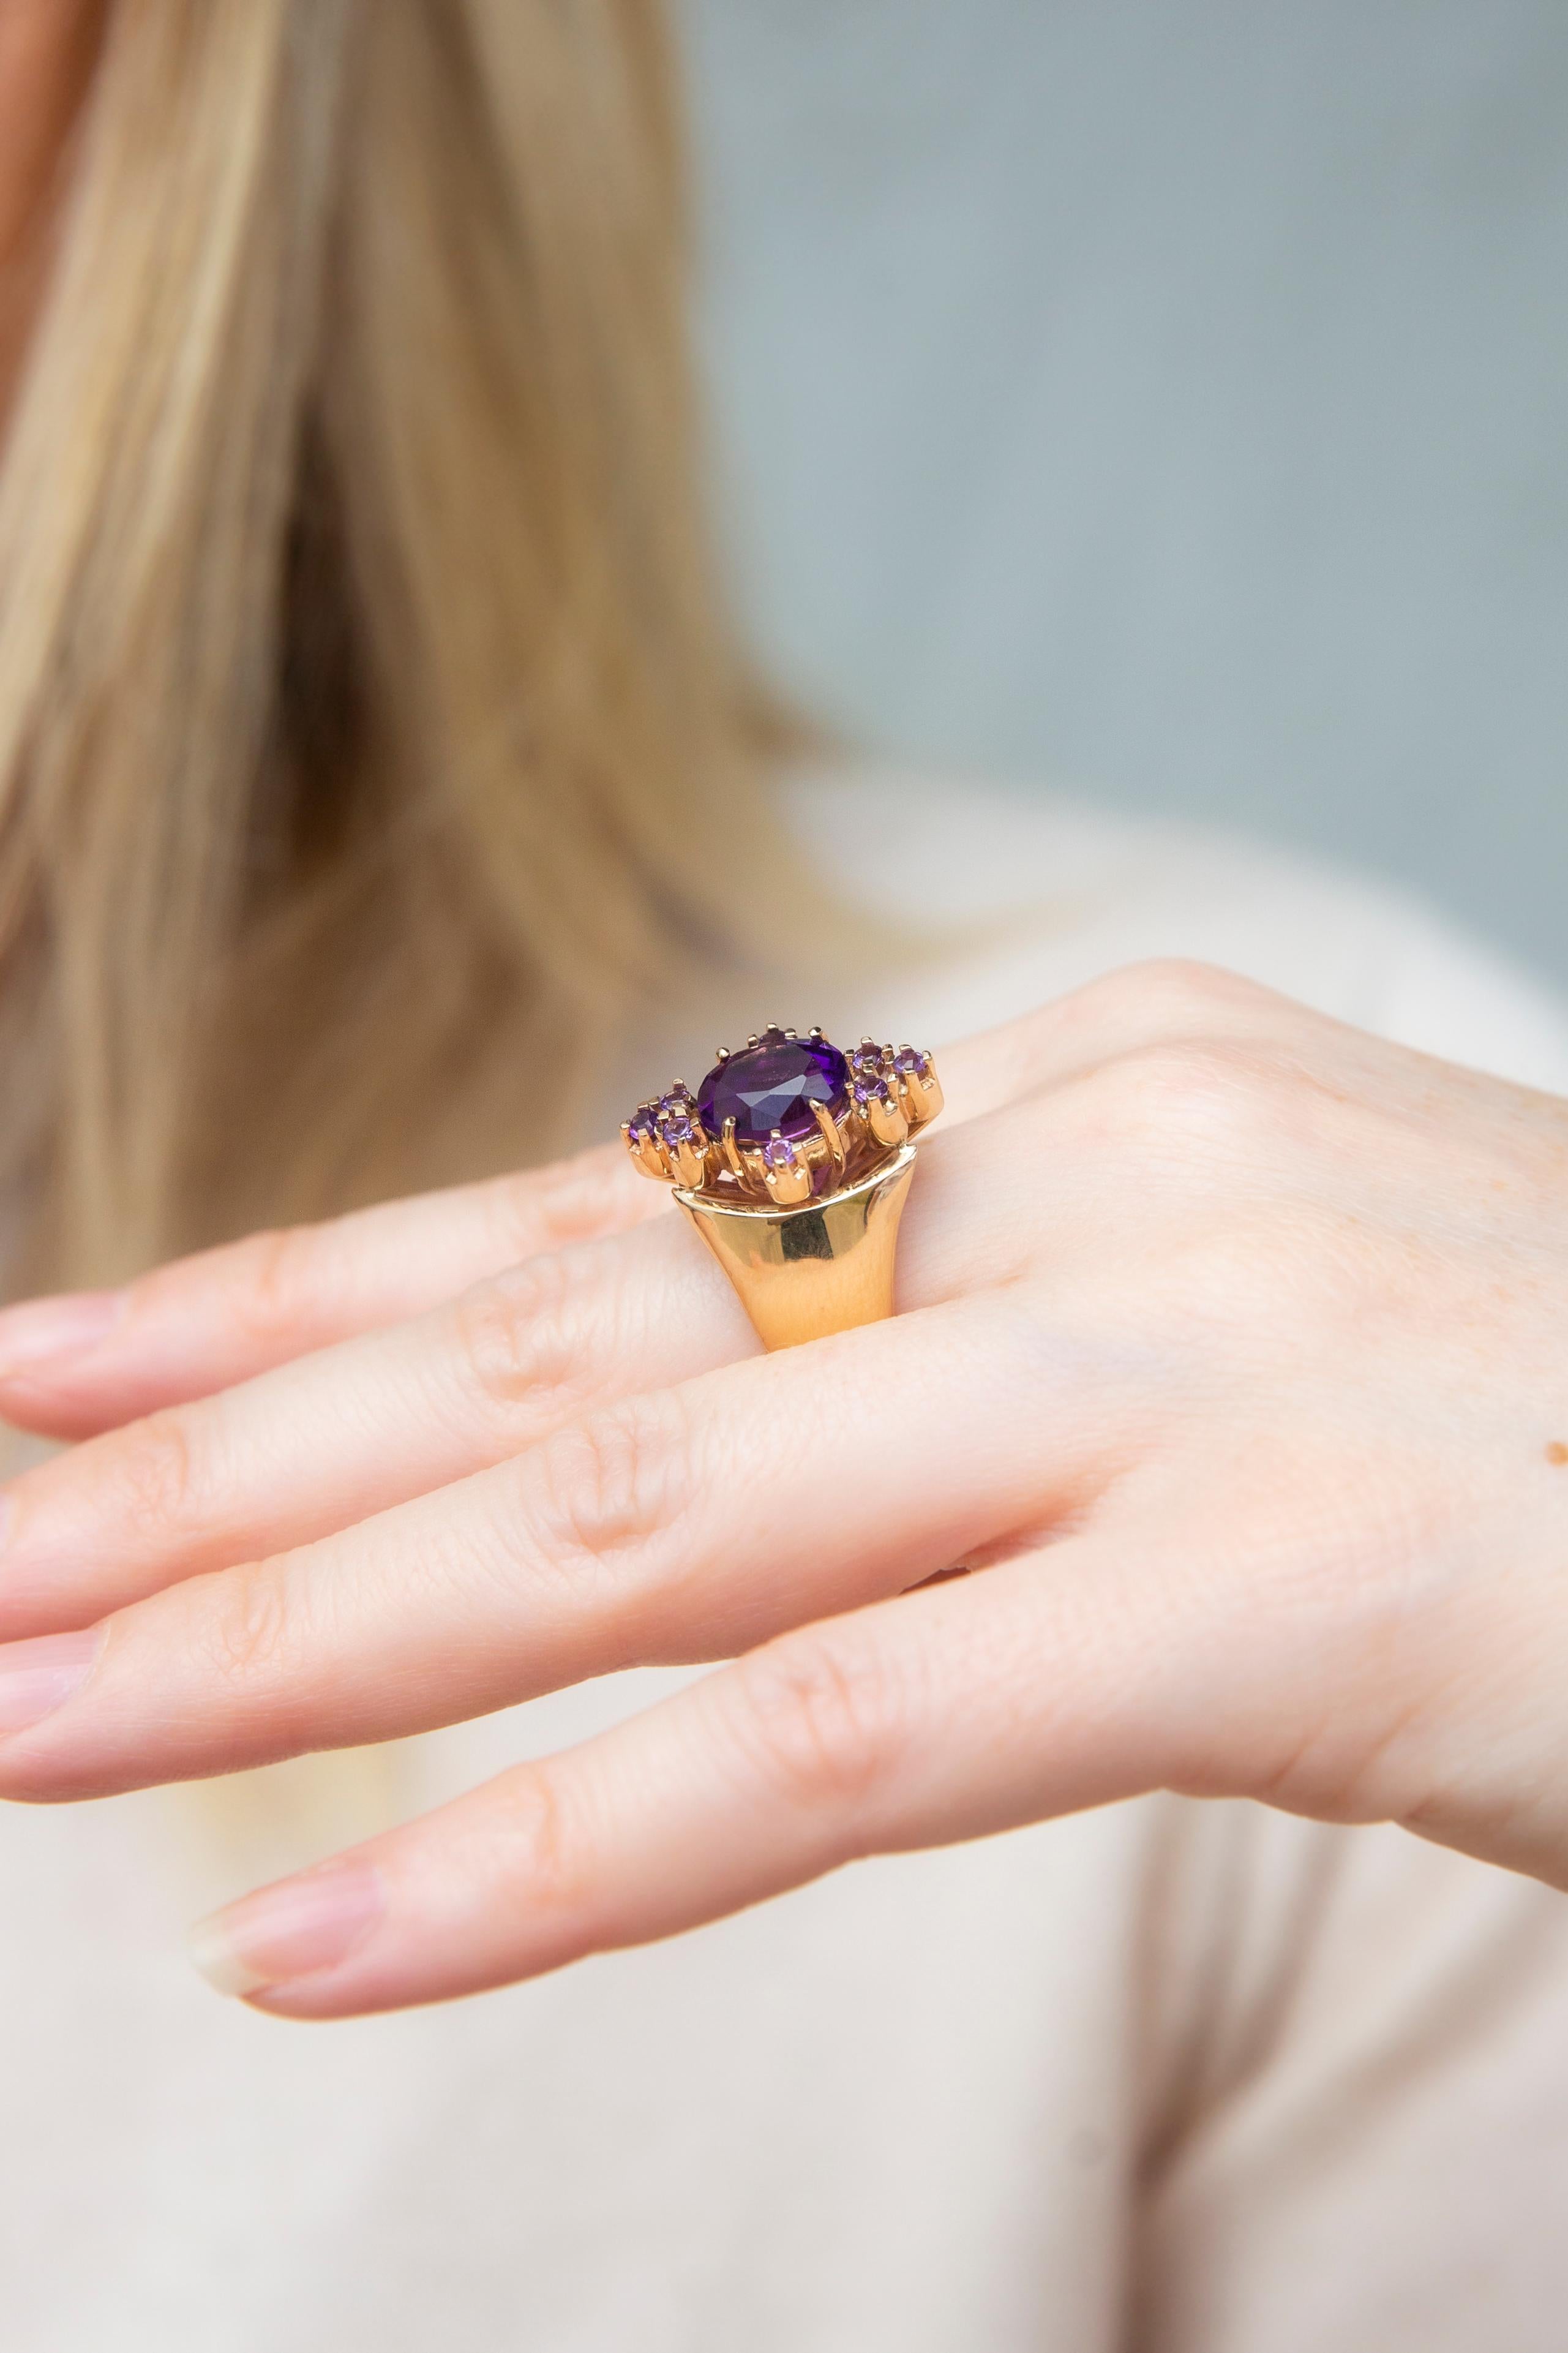 Vintage Circa 1970s Deep Purple Amethyst Cluster Cocktail Ring 9 Carat Gold In Good Condition For Sale In Hamilton, AU